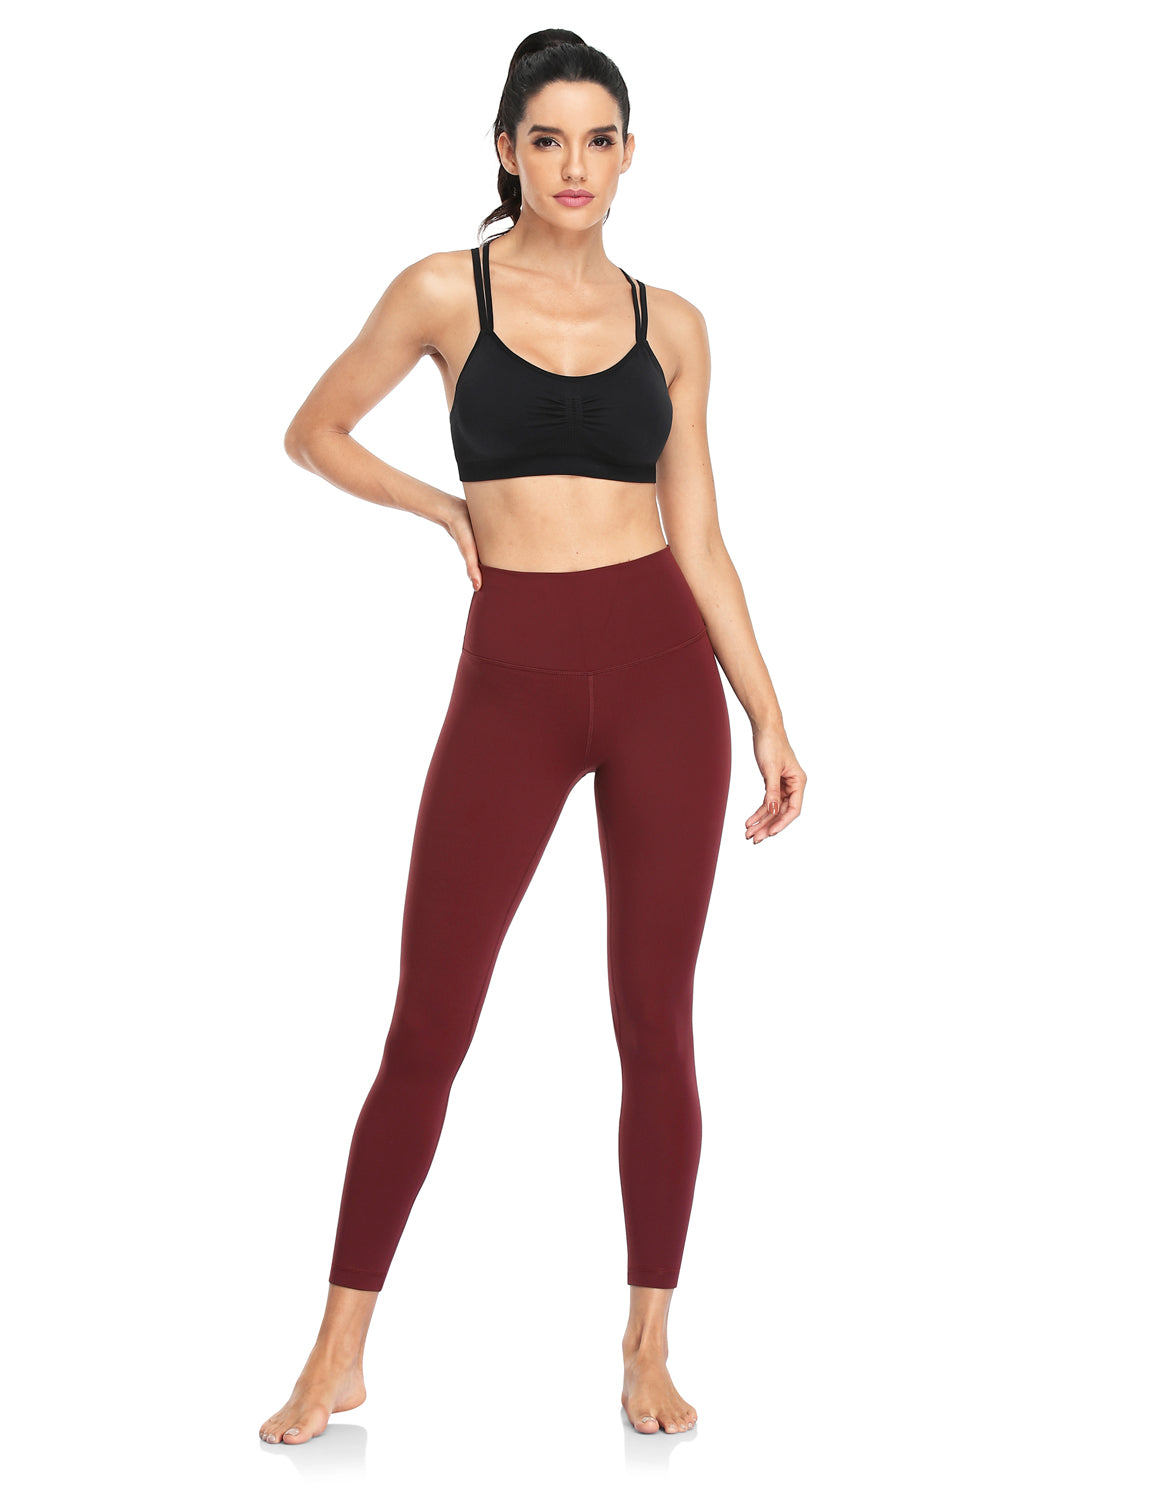 HeyNuts Pure&Plain 7/8 High Waisted Leggings for Women, Athletic  Compression Tummy Control Workout Yoga Pants 25'' Berry Magenta XXS(00) :  Buy Online at Best Price in KSA - Souq is now : Fashion